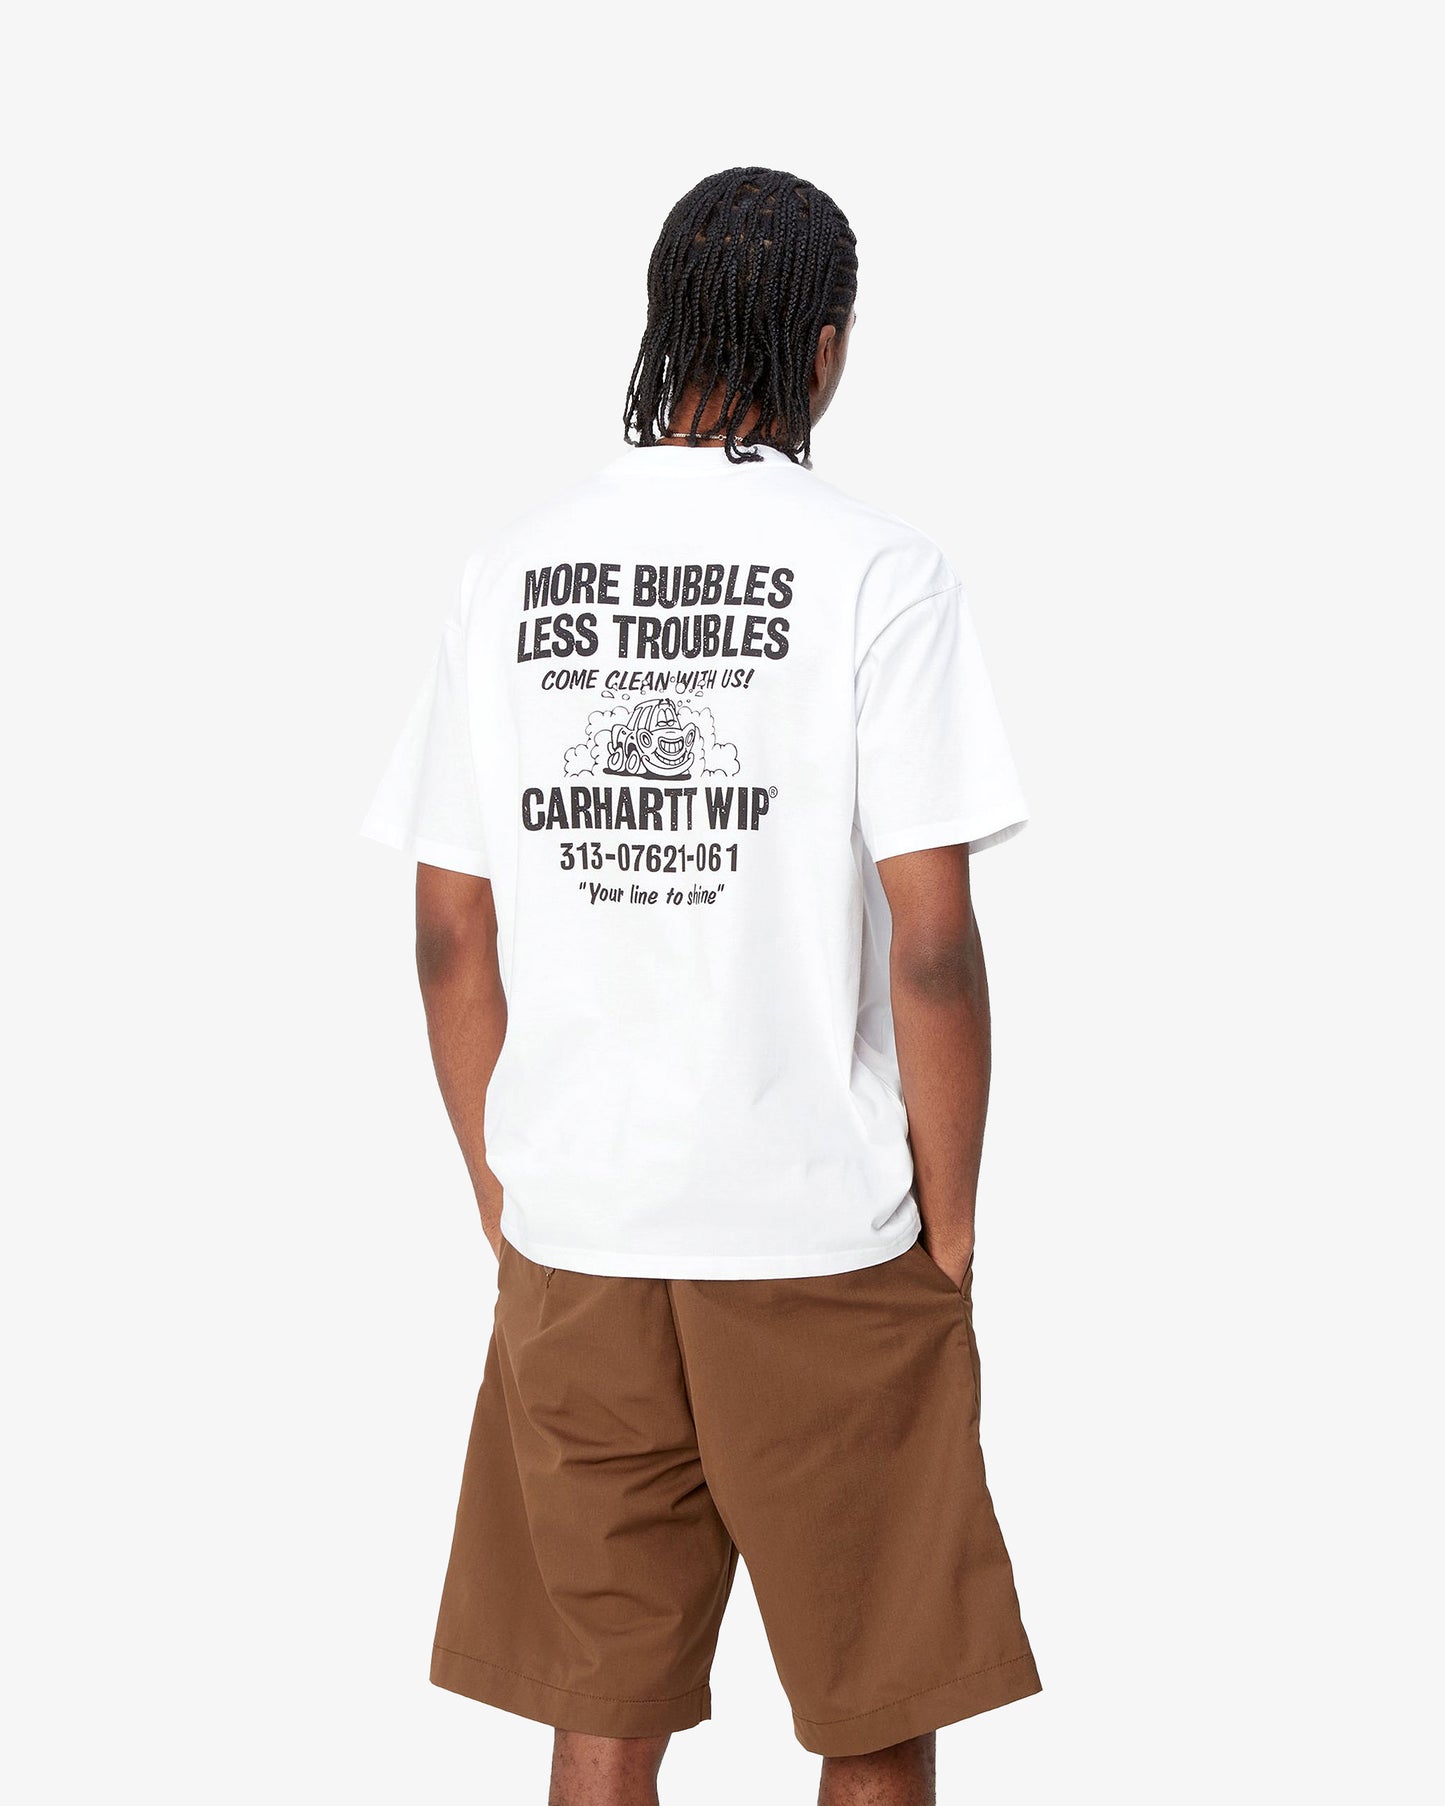 Carhartt WIP S/S Less Troubles T-Shirt